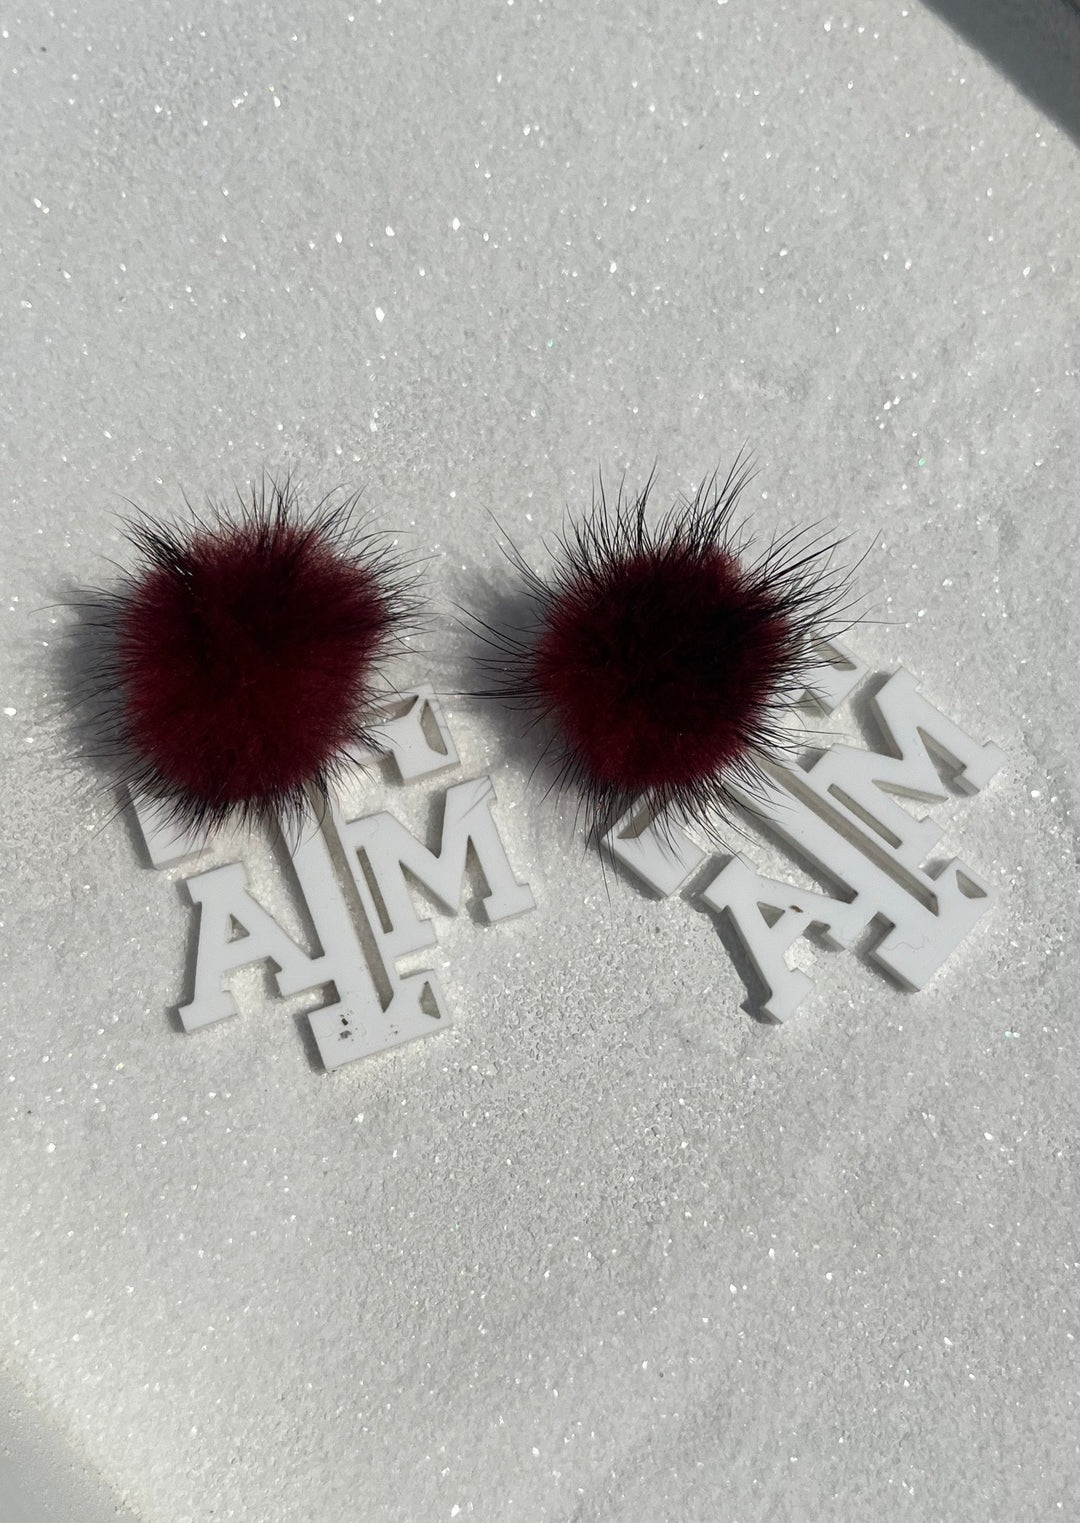 A&M Pom Pom Earrings, Jewelry, Adeline, Adeline, dallas boutique, dallas texas, texas boutique, women's boutique dallas, adeline boutique, dallas boutique, trendy boutique, affordable boutique